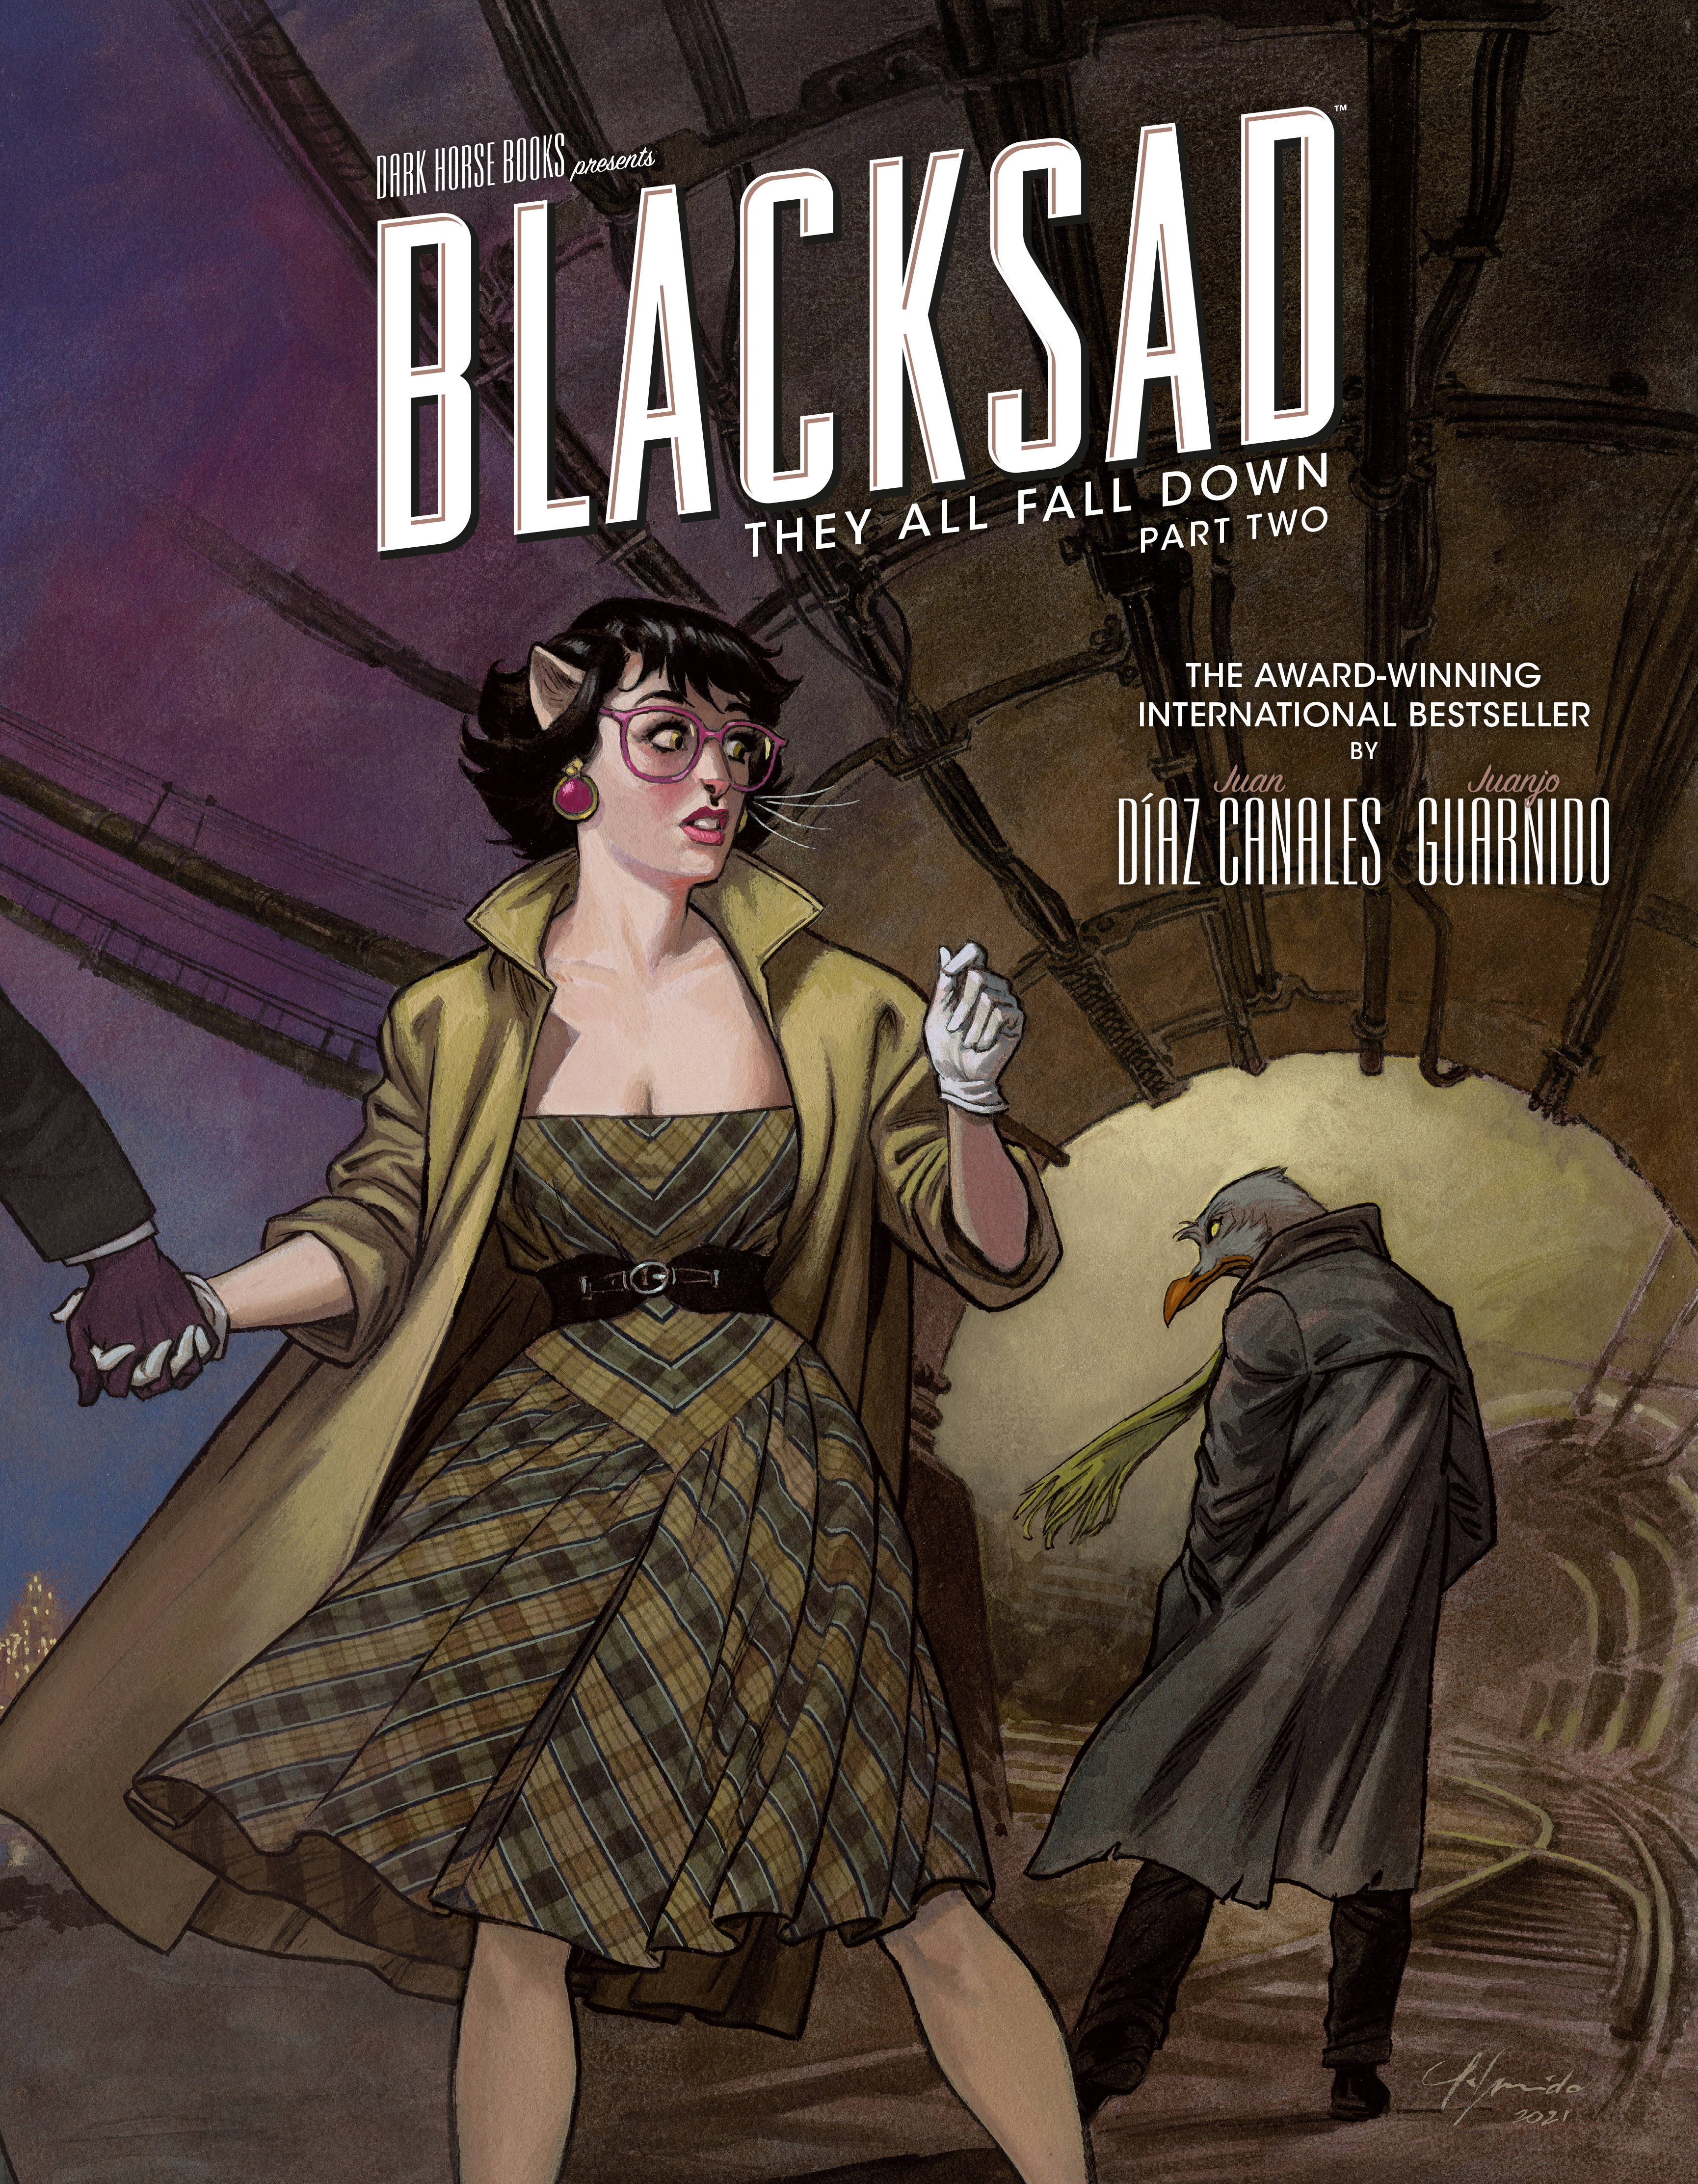 BLACKSAD: THEY ALL FALL DOWN • PART TWO